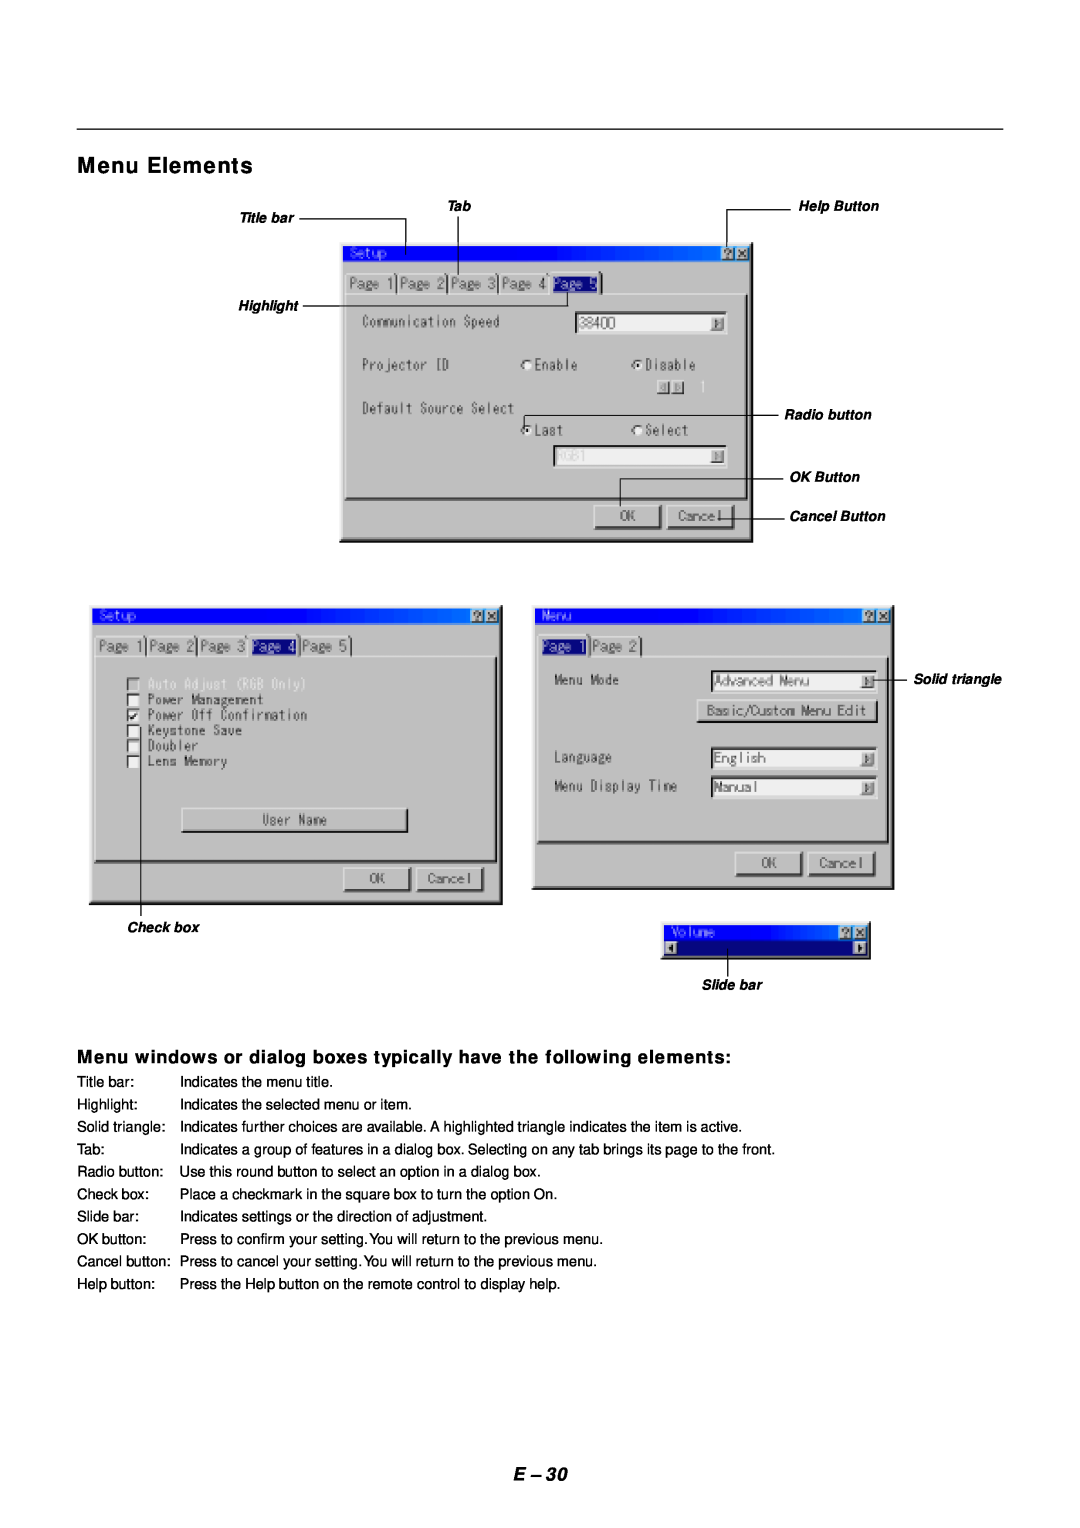 NEC SX4000 user manual Menu Elements, Menu windows or dialog boxes typically have the following elements 